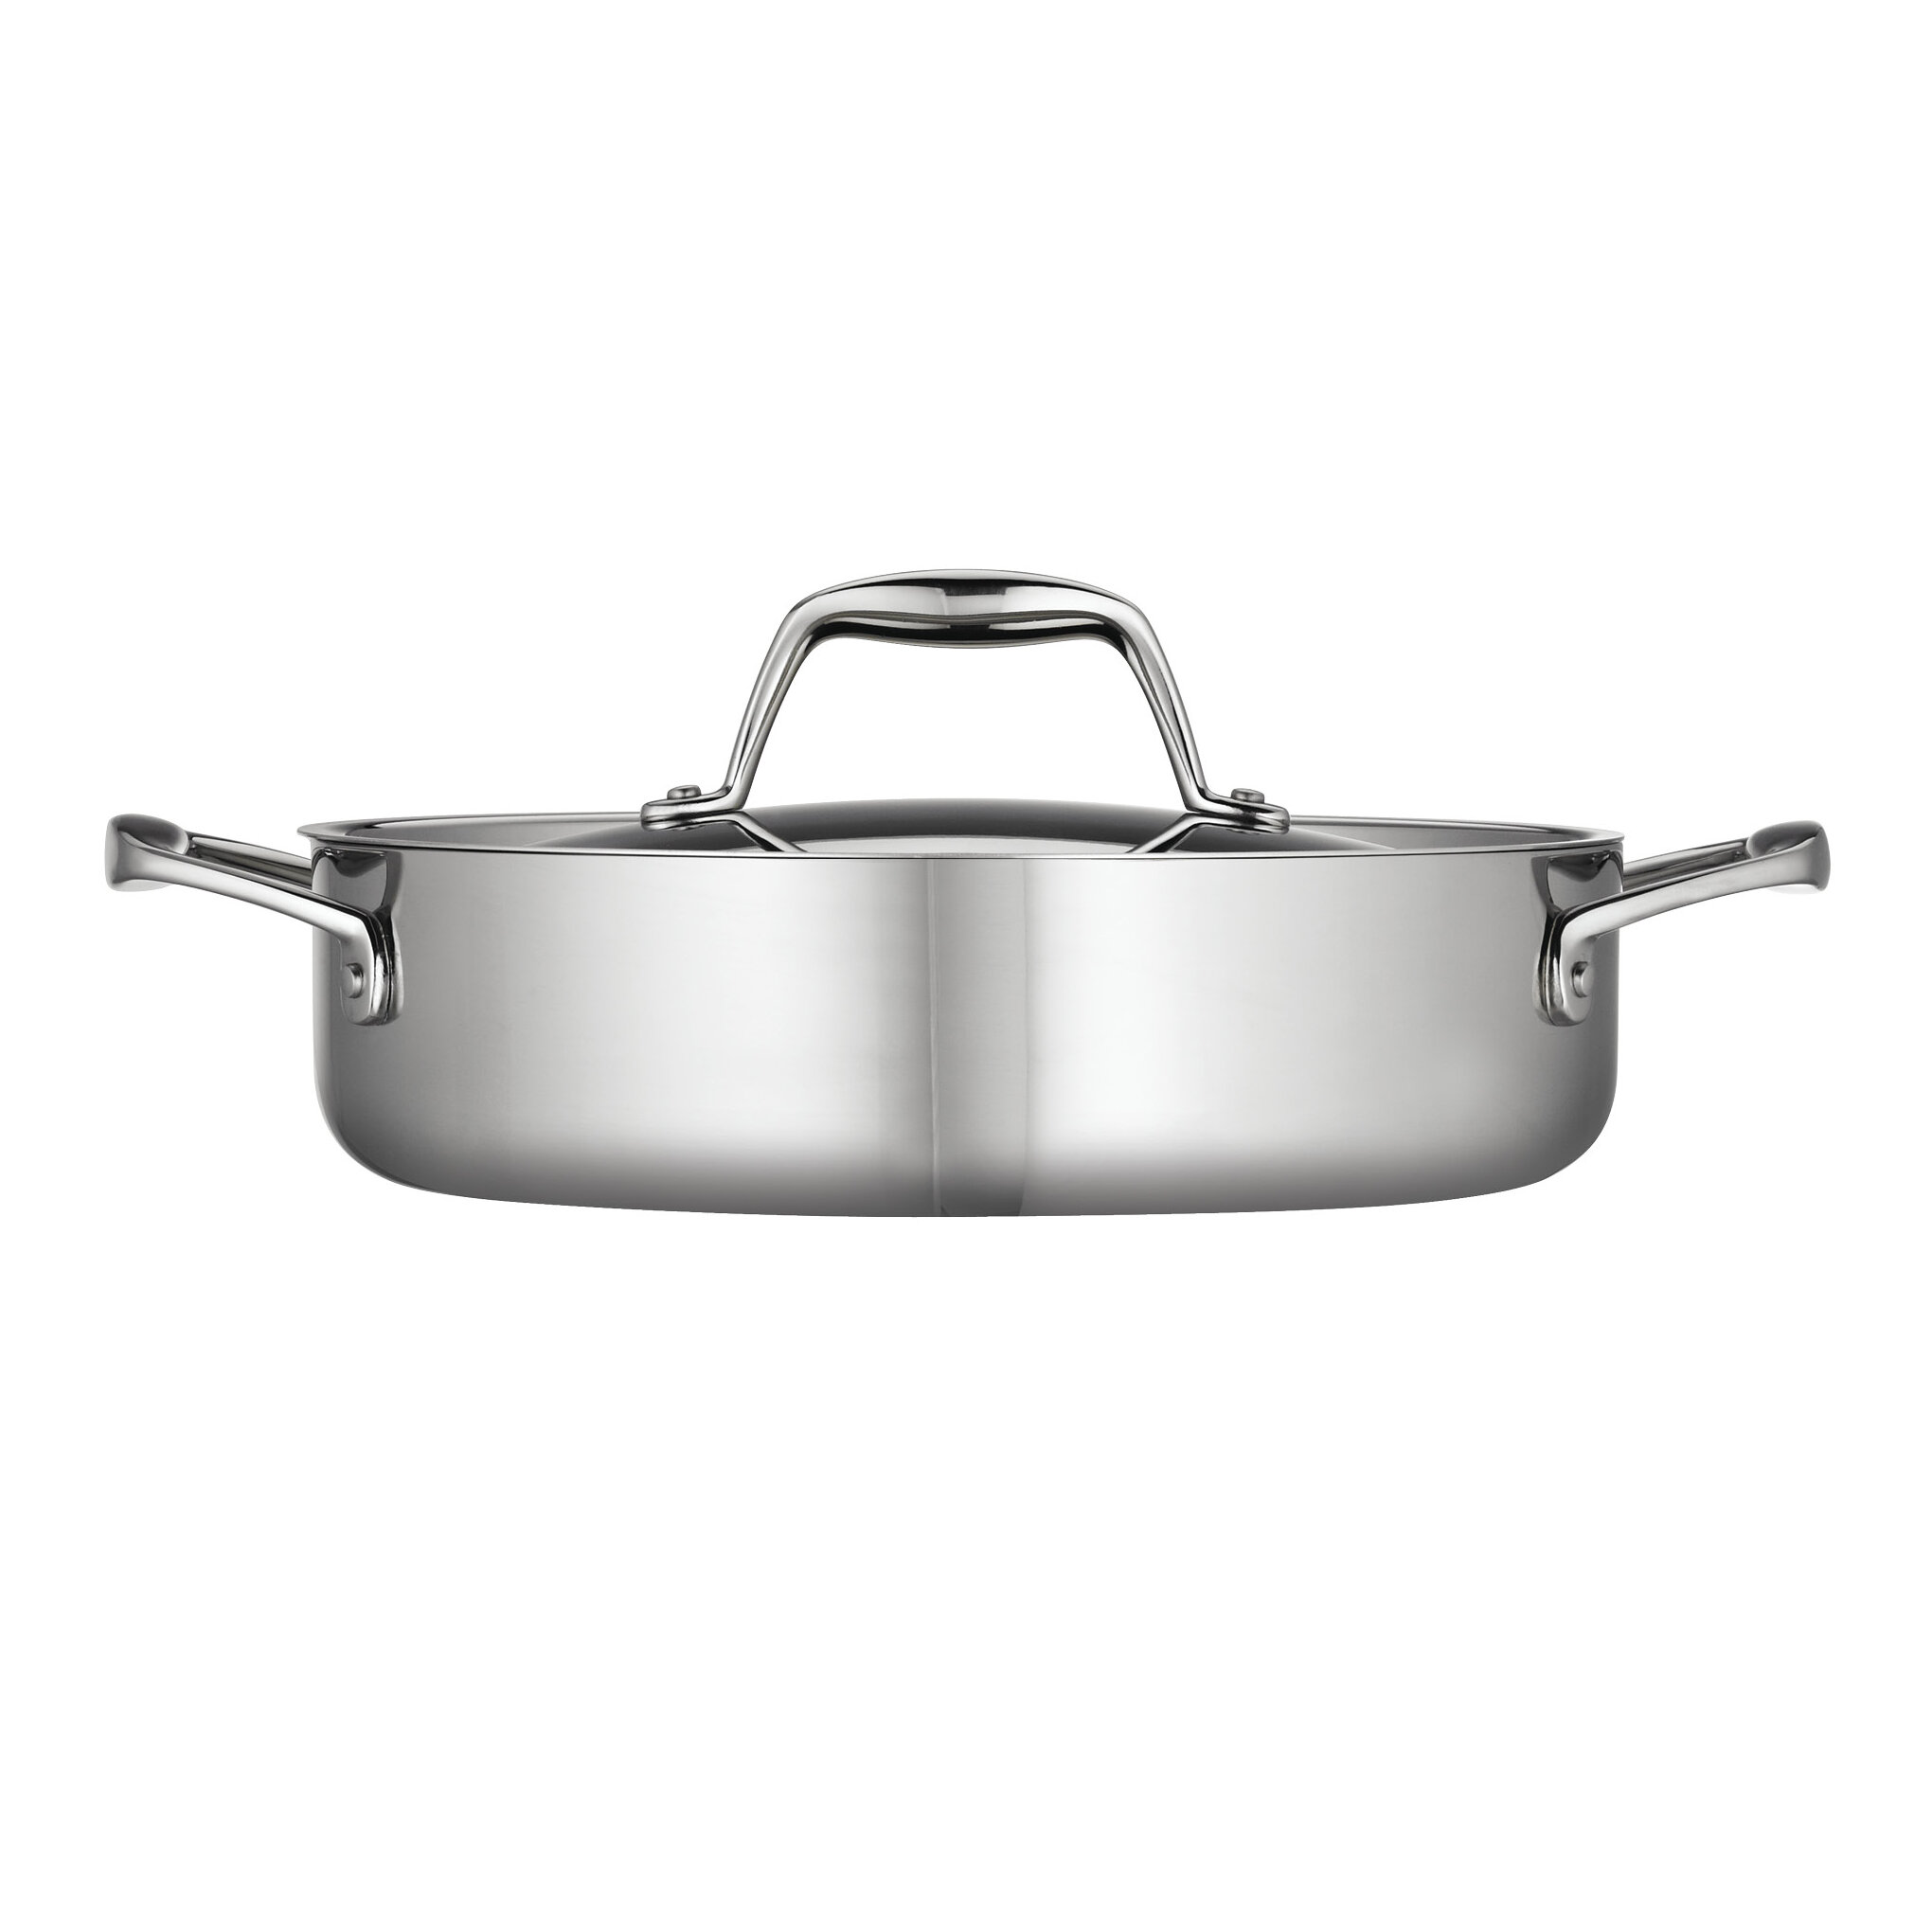 Tramontina Brava Frying Pan Stainless Steel Triple Bottom With